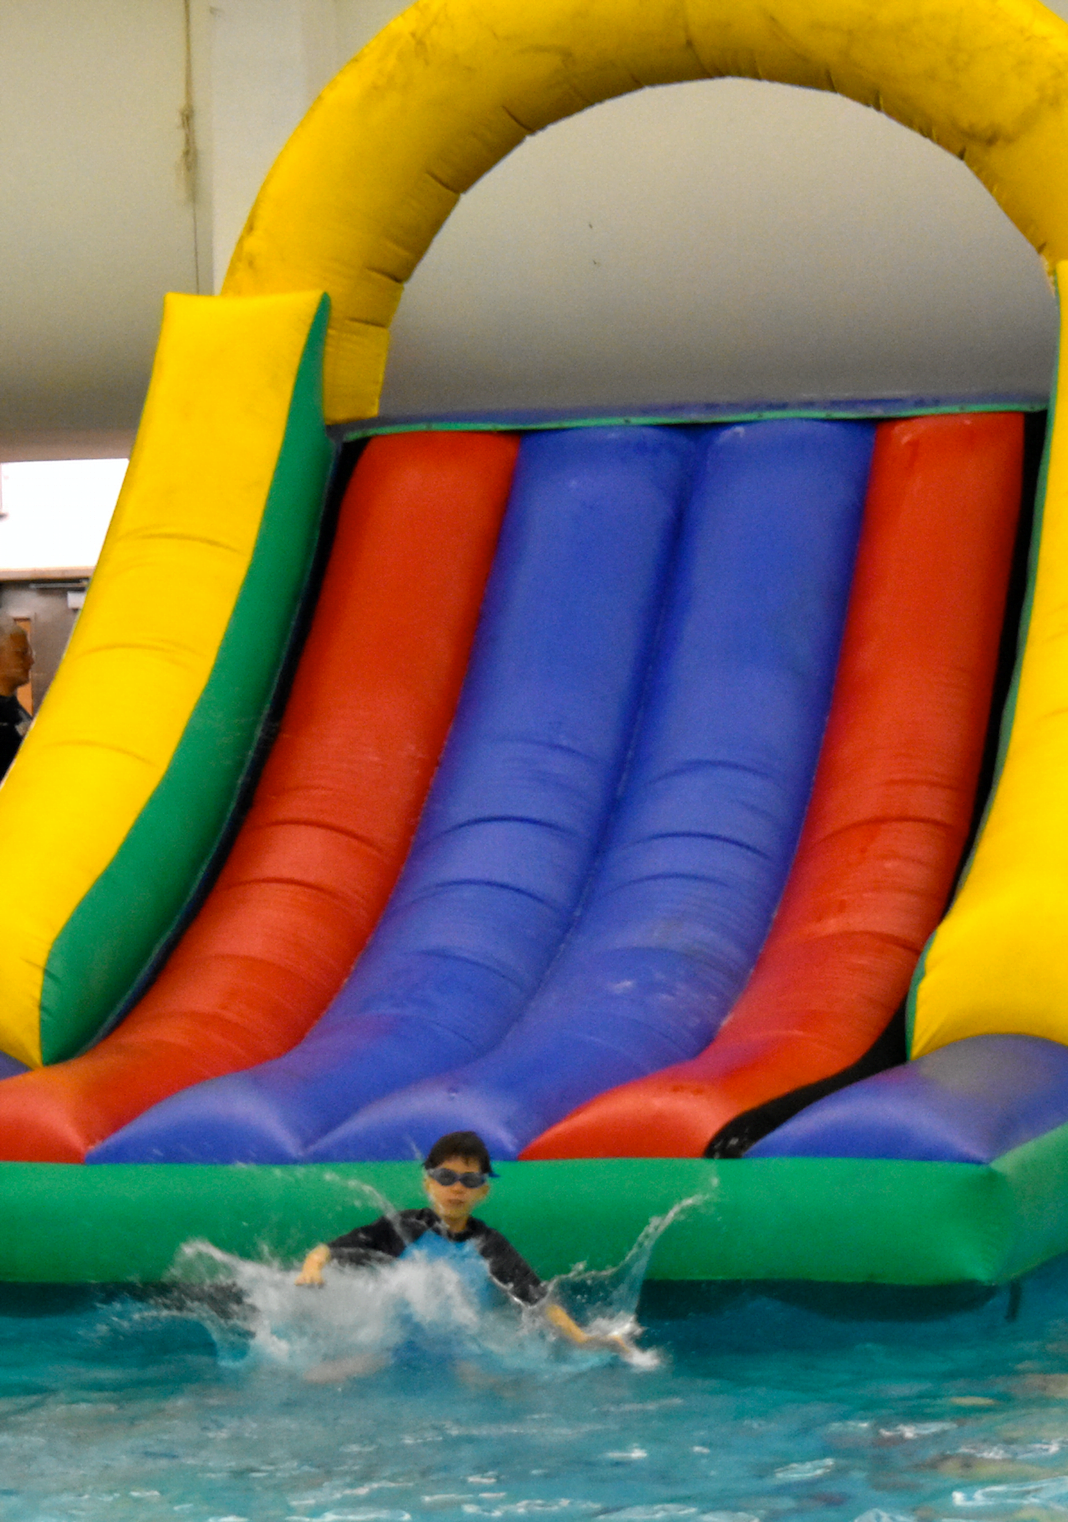 Scout makes a splash of the giant inflatable slide at the YMCA “Scout Night” event in Greenwich. Photo credit: Heather Brown 